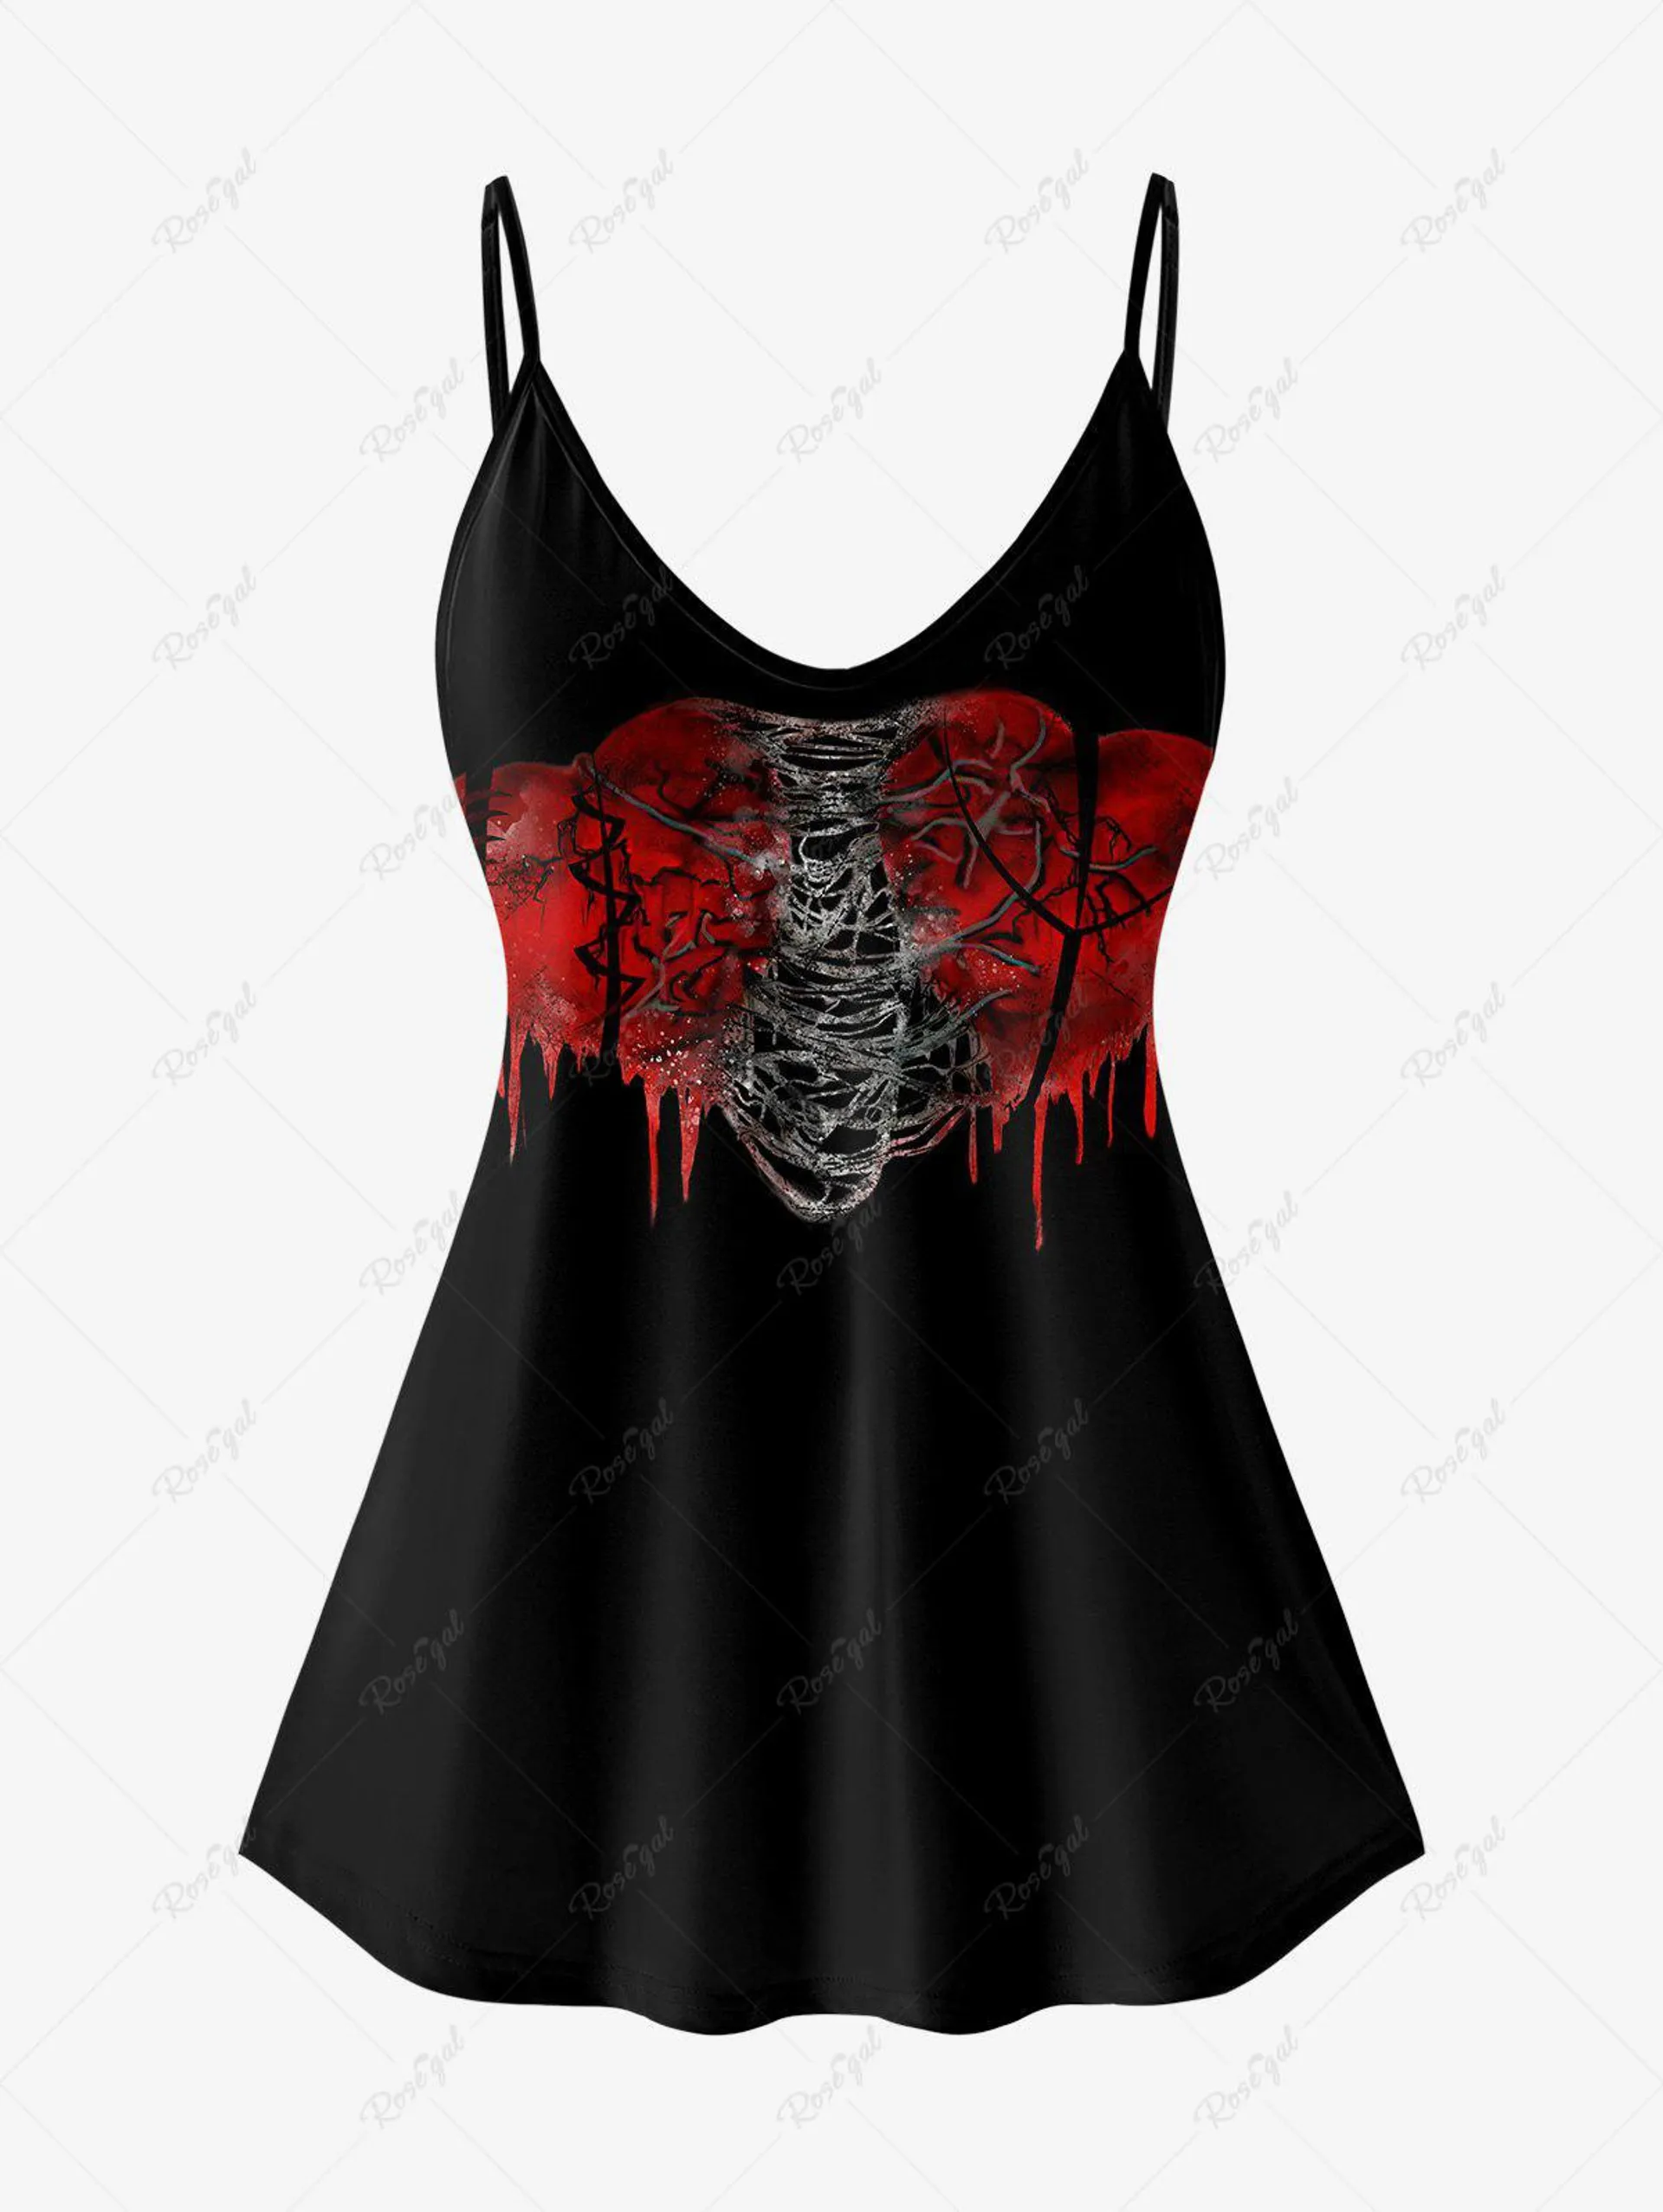 Gothic Ripped Heart Print Cami Top (Adjustable Straps) - 1x | Us 14-16